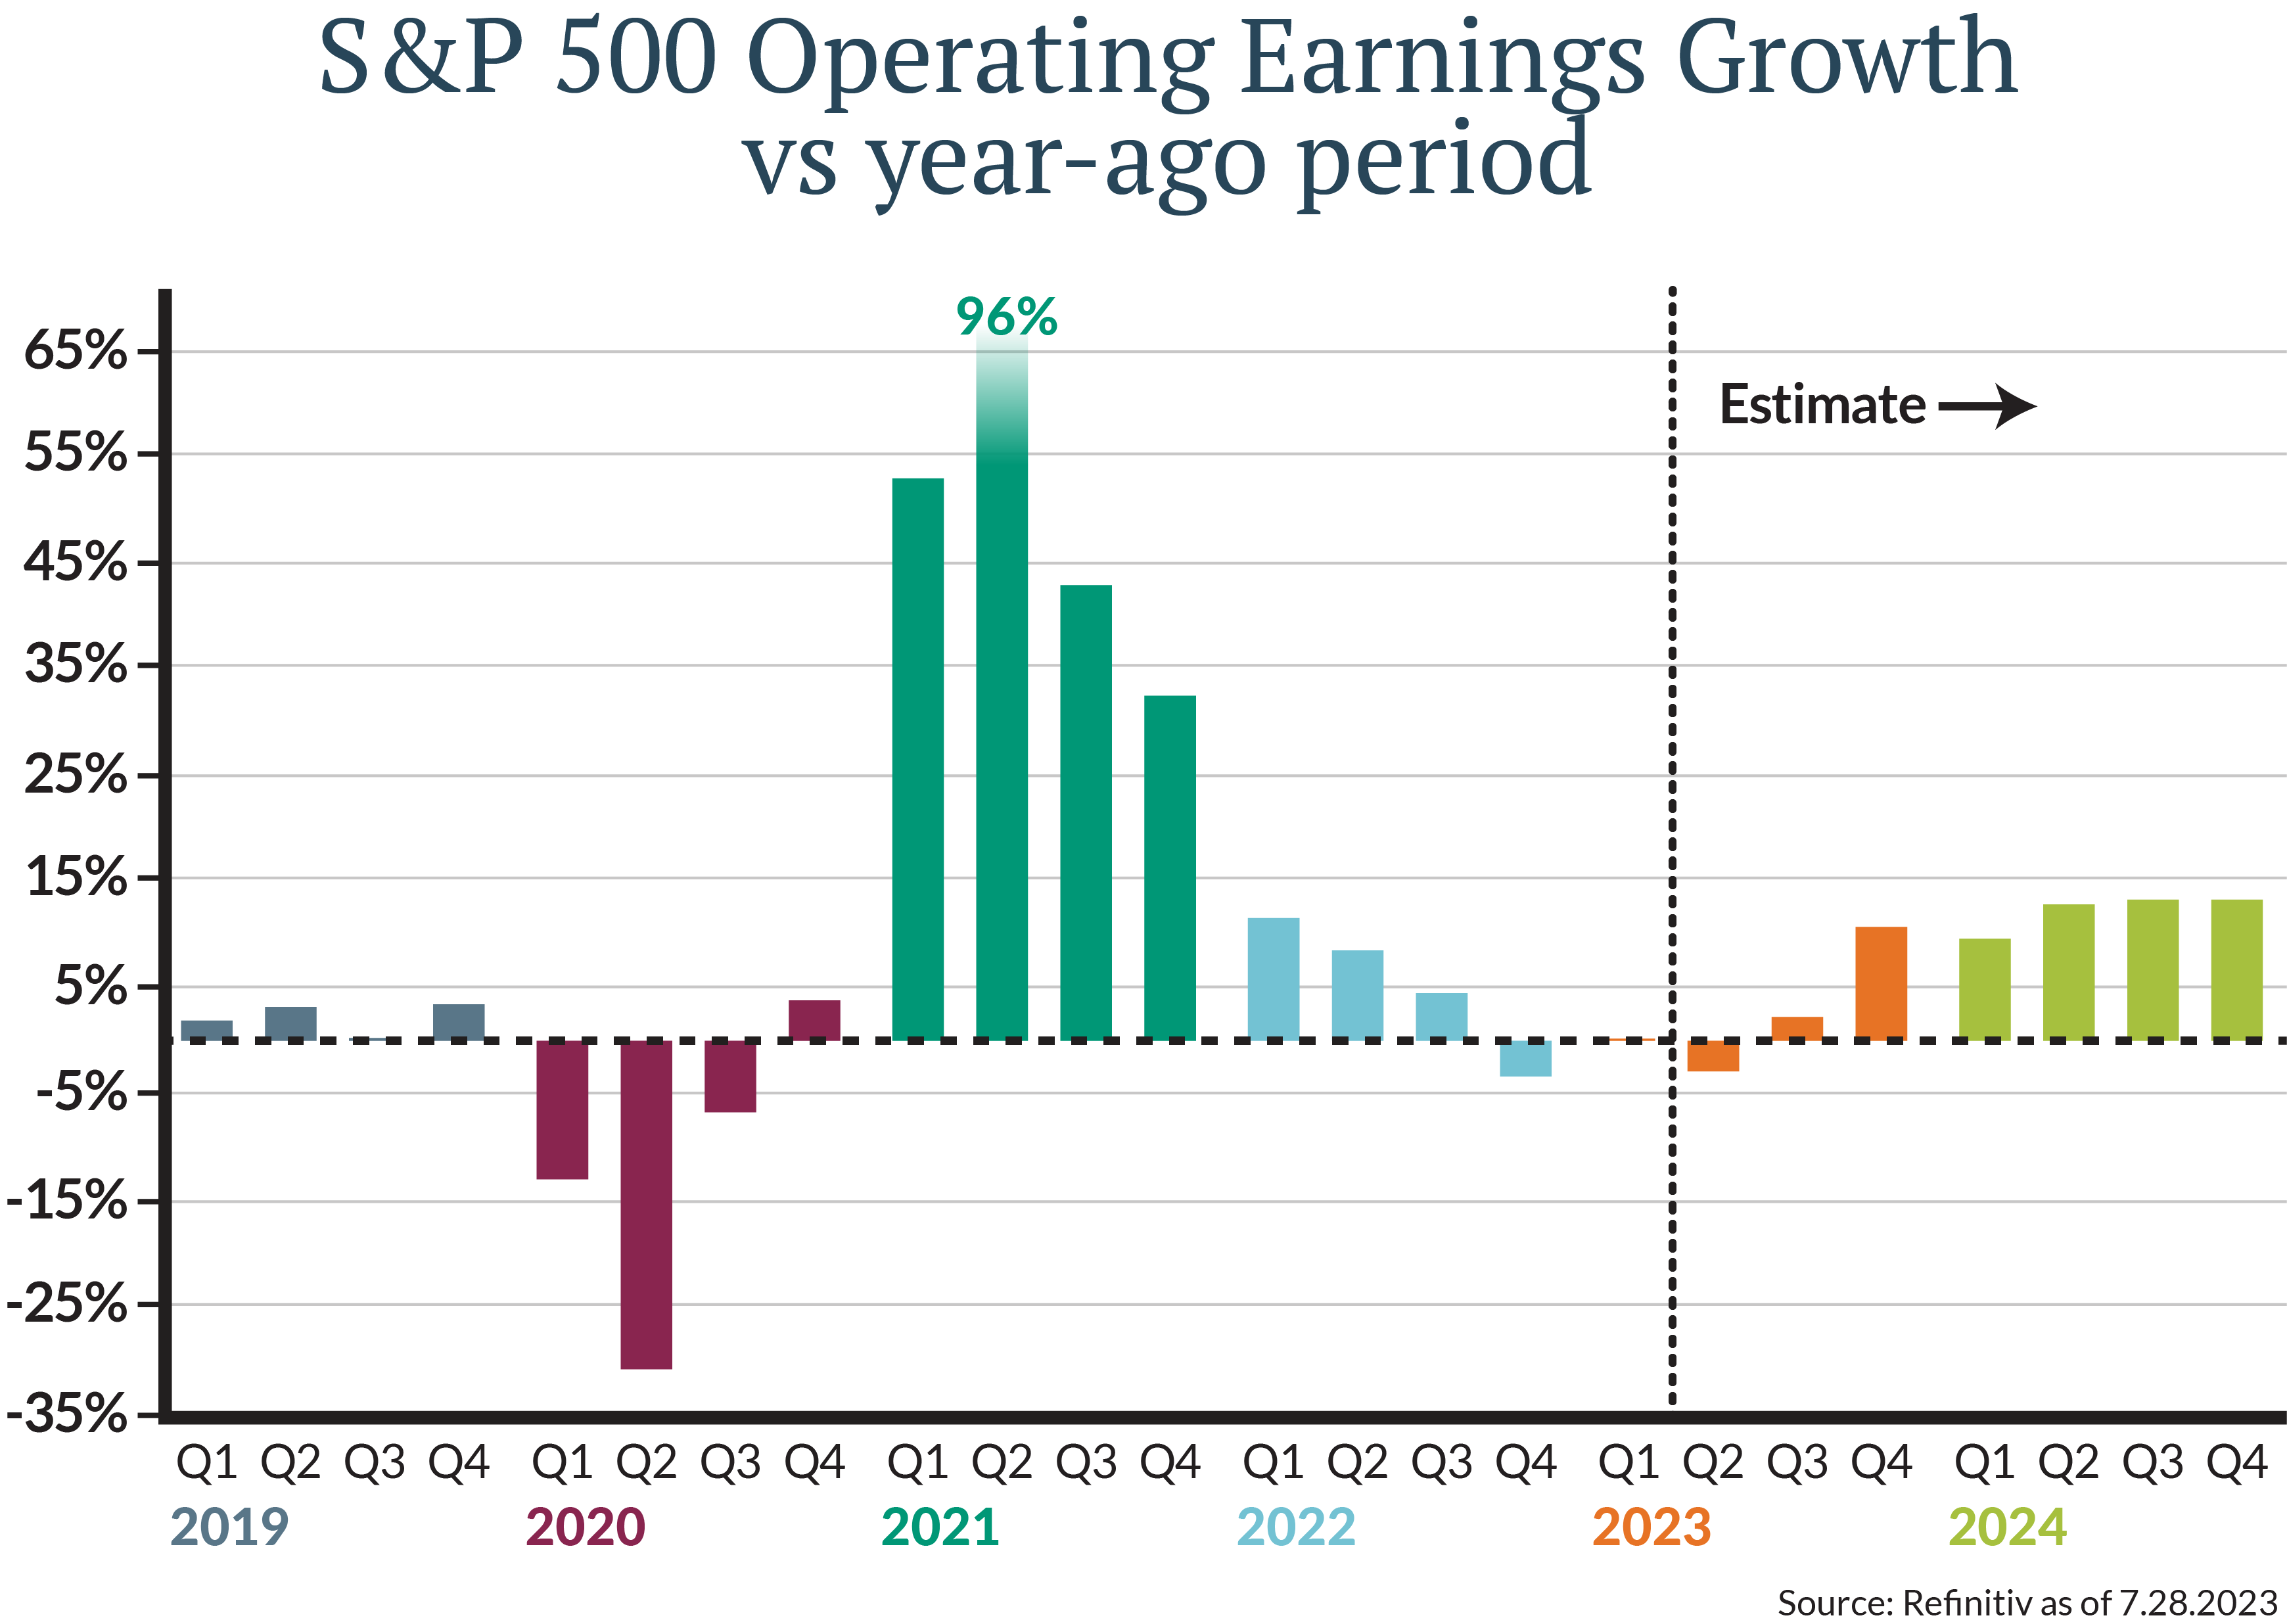 Although earnings did shrink on average versus a year ago, they actually came in better than expected. The outlook for future earnings growth also improved from what people had expected.